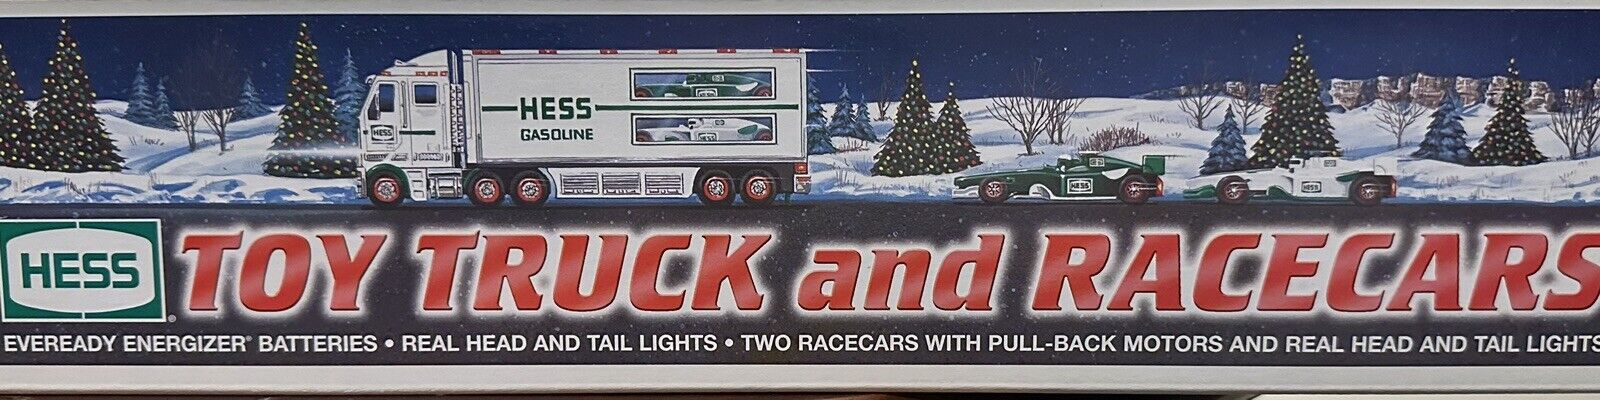 2003 Hess Oil Company Truck And Race Cars. New